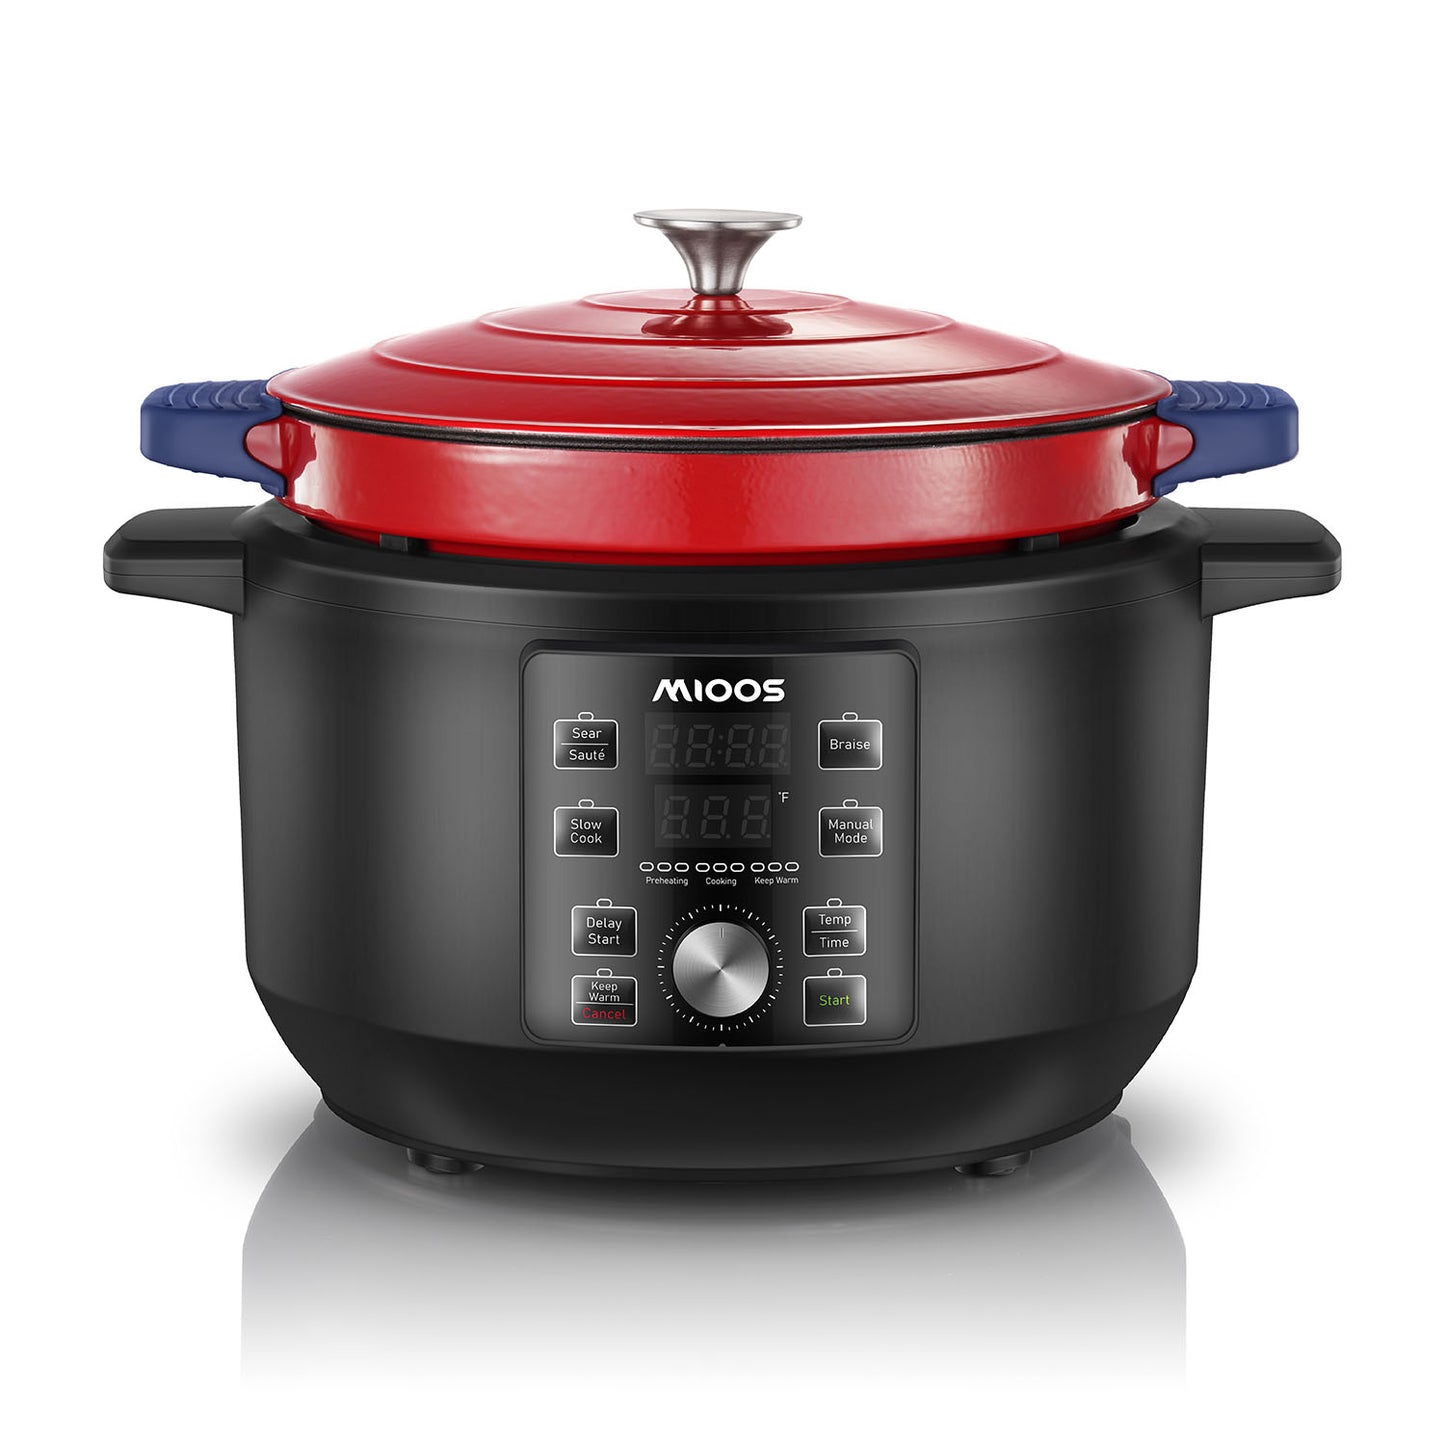 MIOOS Electric Enameled Cast Iron Dutch Oven Pot 6 in 1 6 QT Capacity with Temperature and Cook Time Adjustable, Sauté, Stew, Steam, Slow Cook, Keep Warm, Delay, Manual Modes